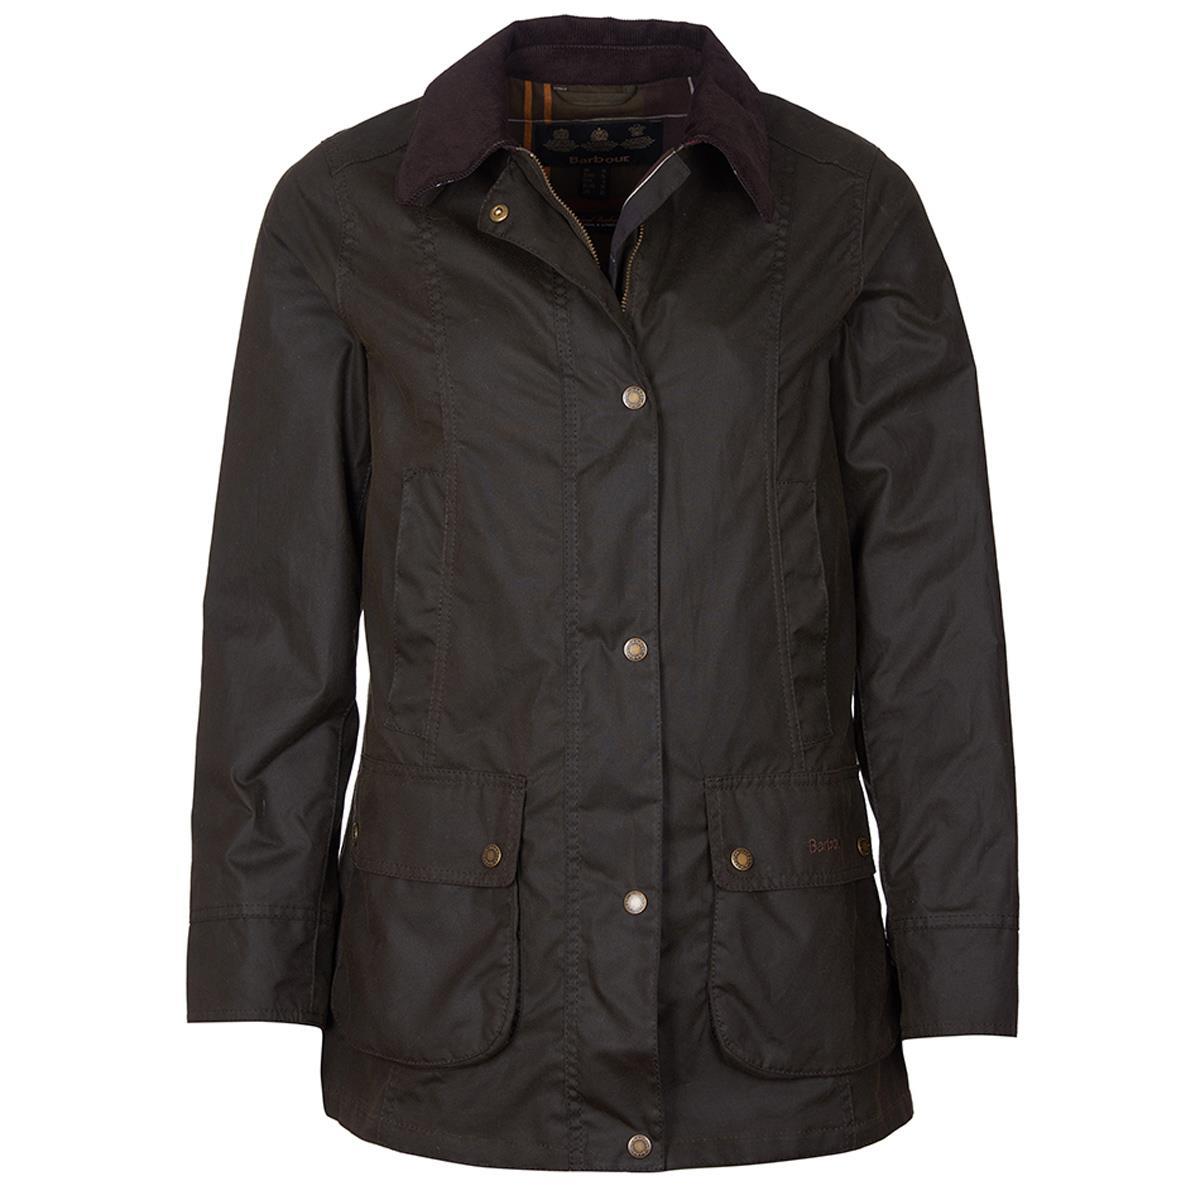 What is the proper cleaning method for the Barbour Fiddich Women's Wax Jacket?